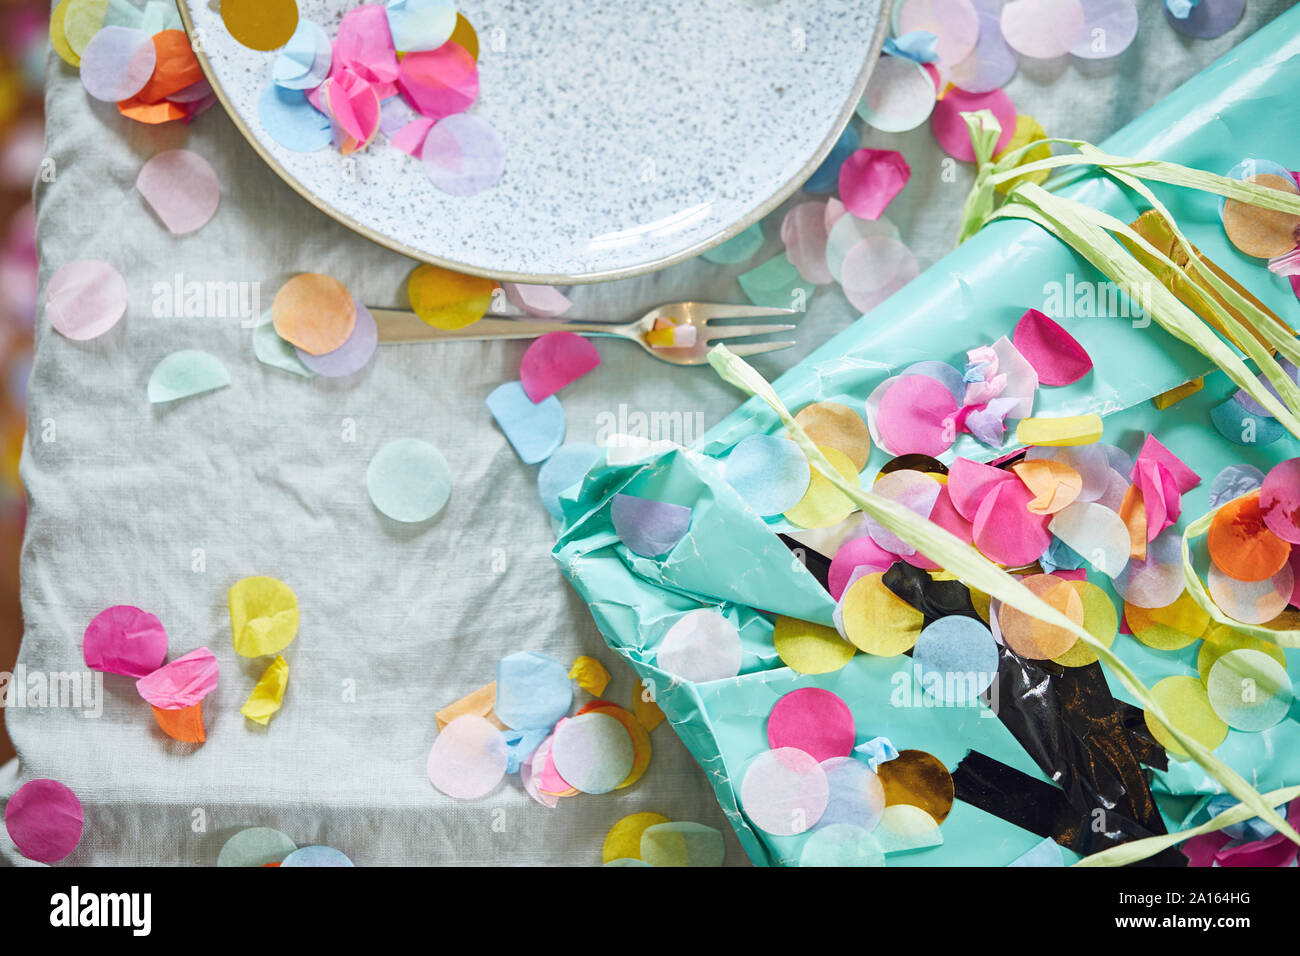 Present on table, decorated with confetti Stock Photo